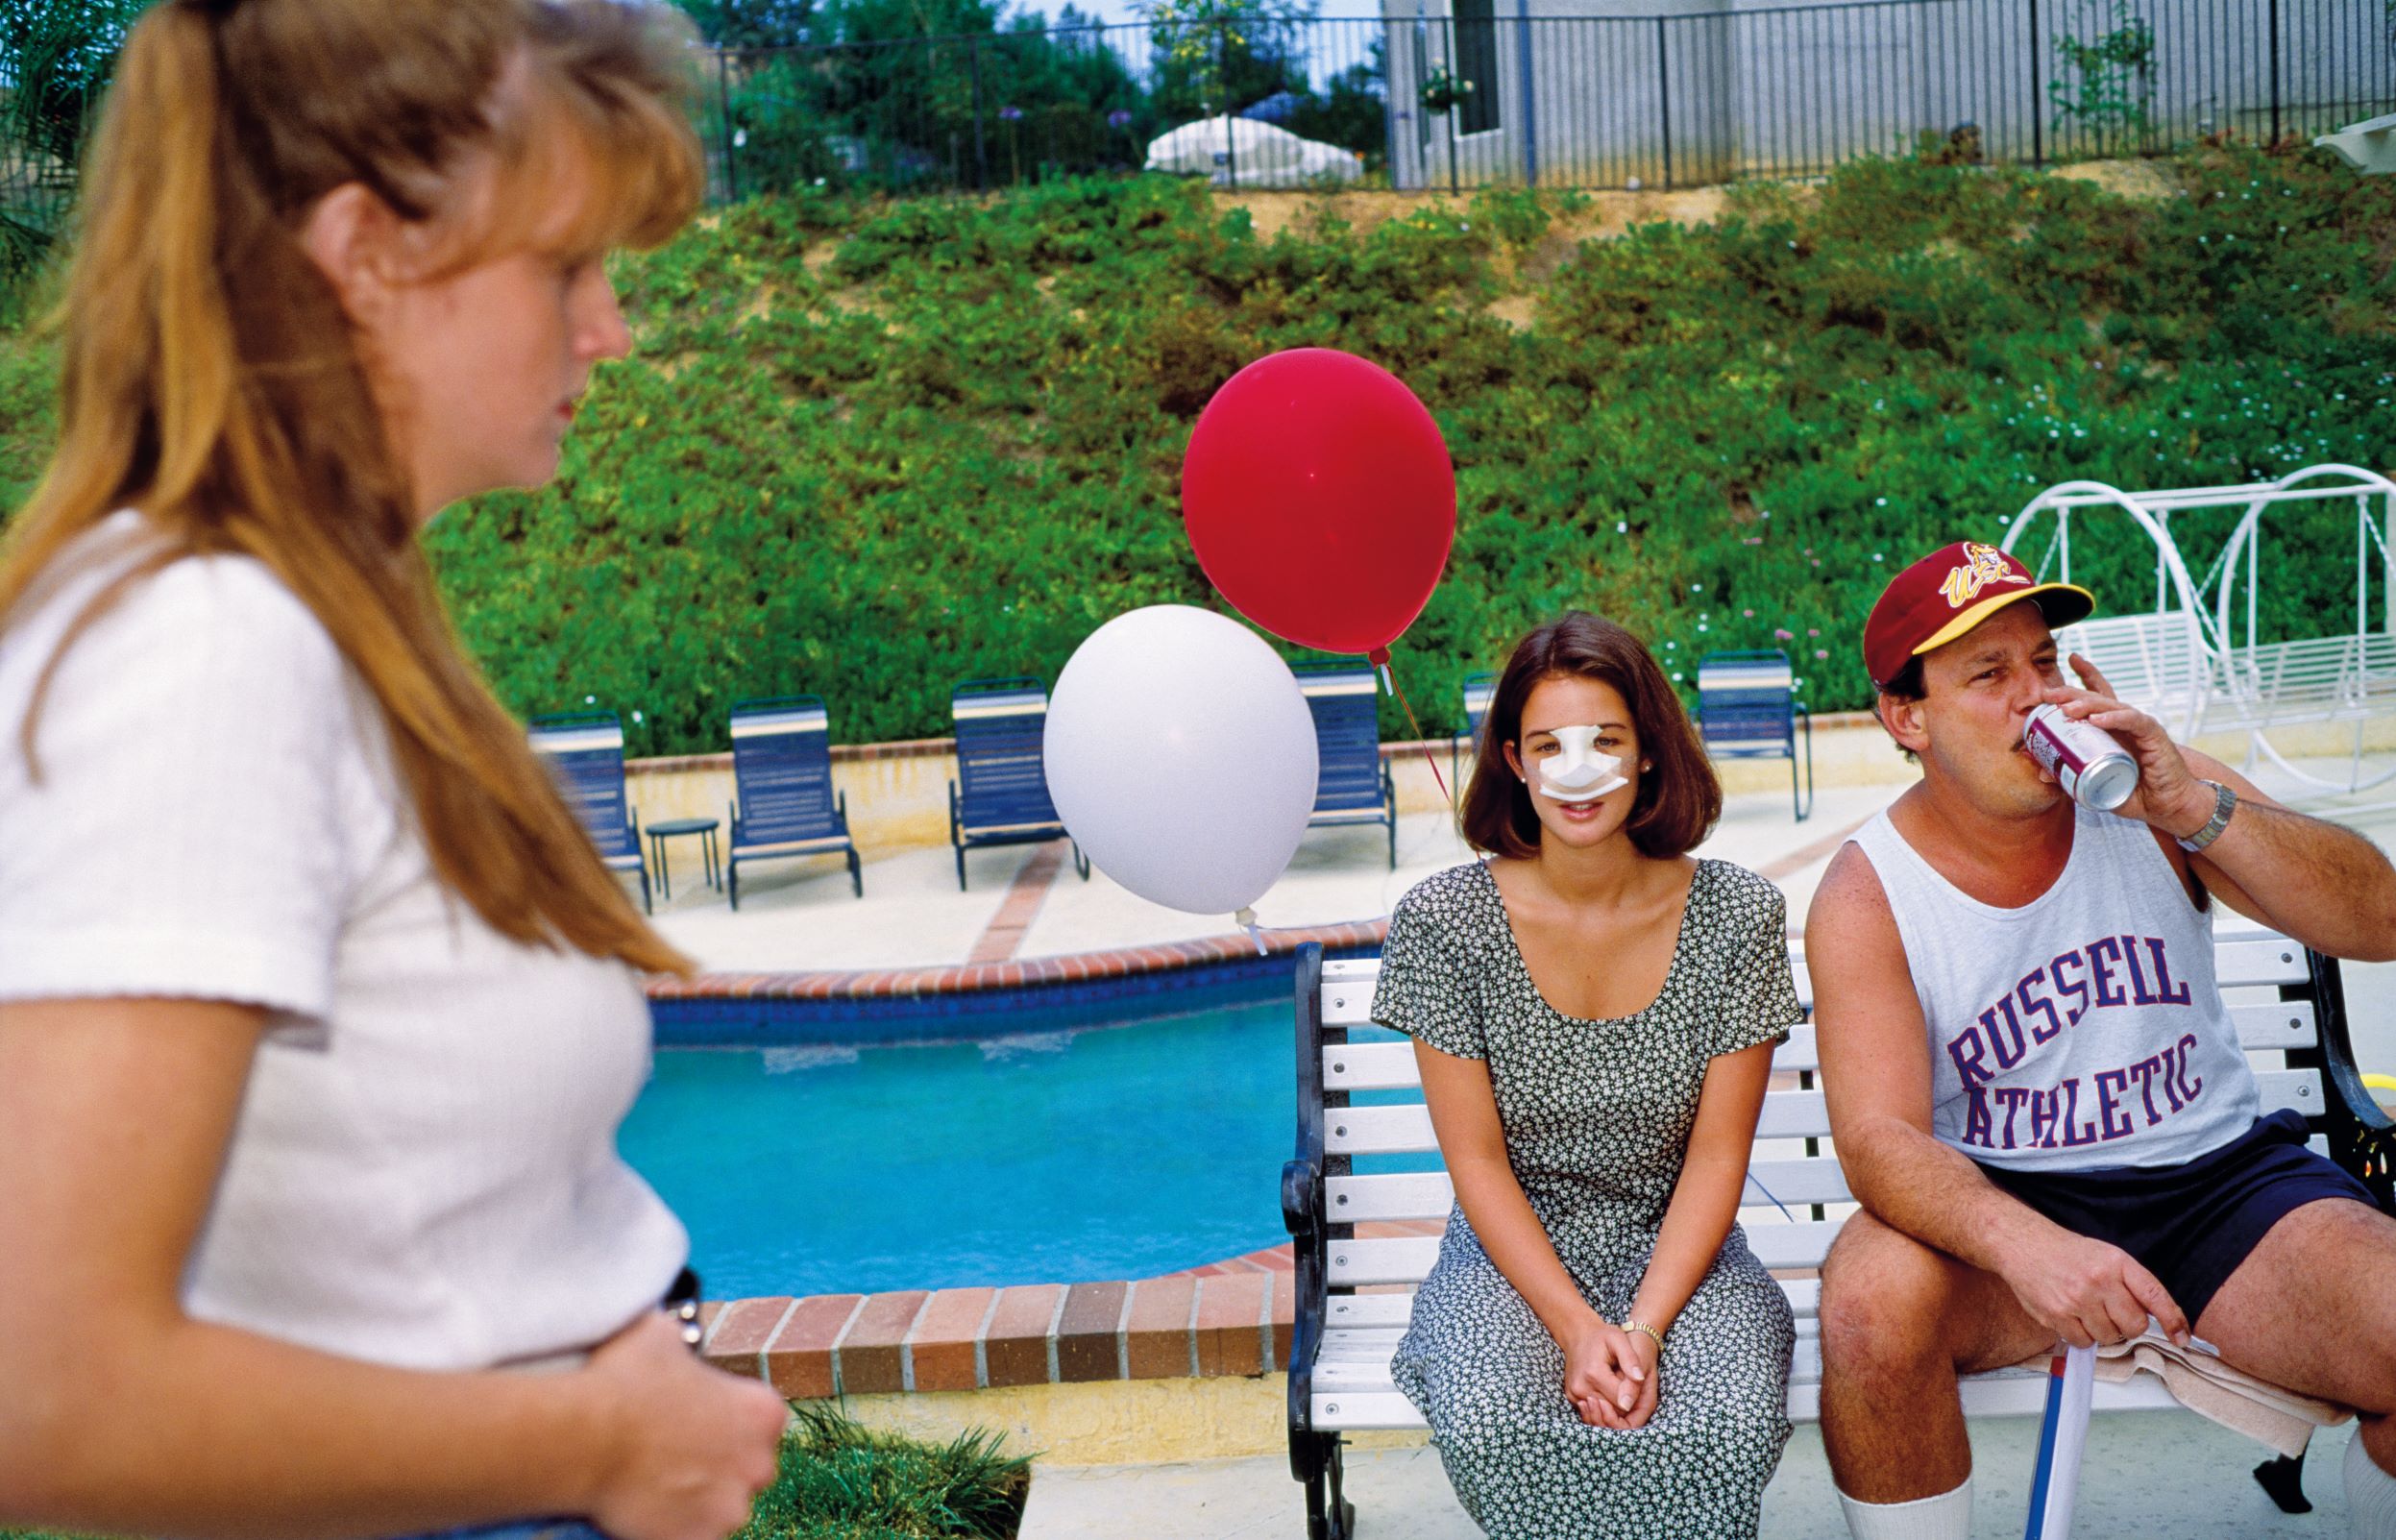 Lindsey, 18, at a Fourth of July party three days after her nose job,  Calabasas, California, 1993. Five of her  friends at high school have already had plastic surgery. From Generation Wealth by Lauren Greenfield